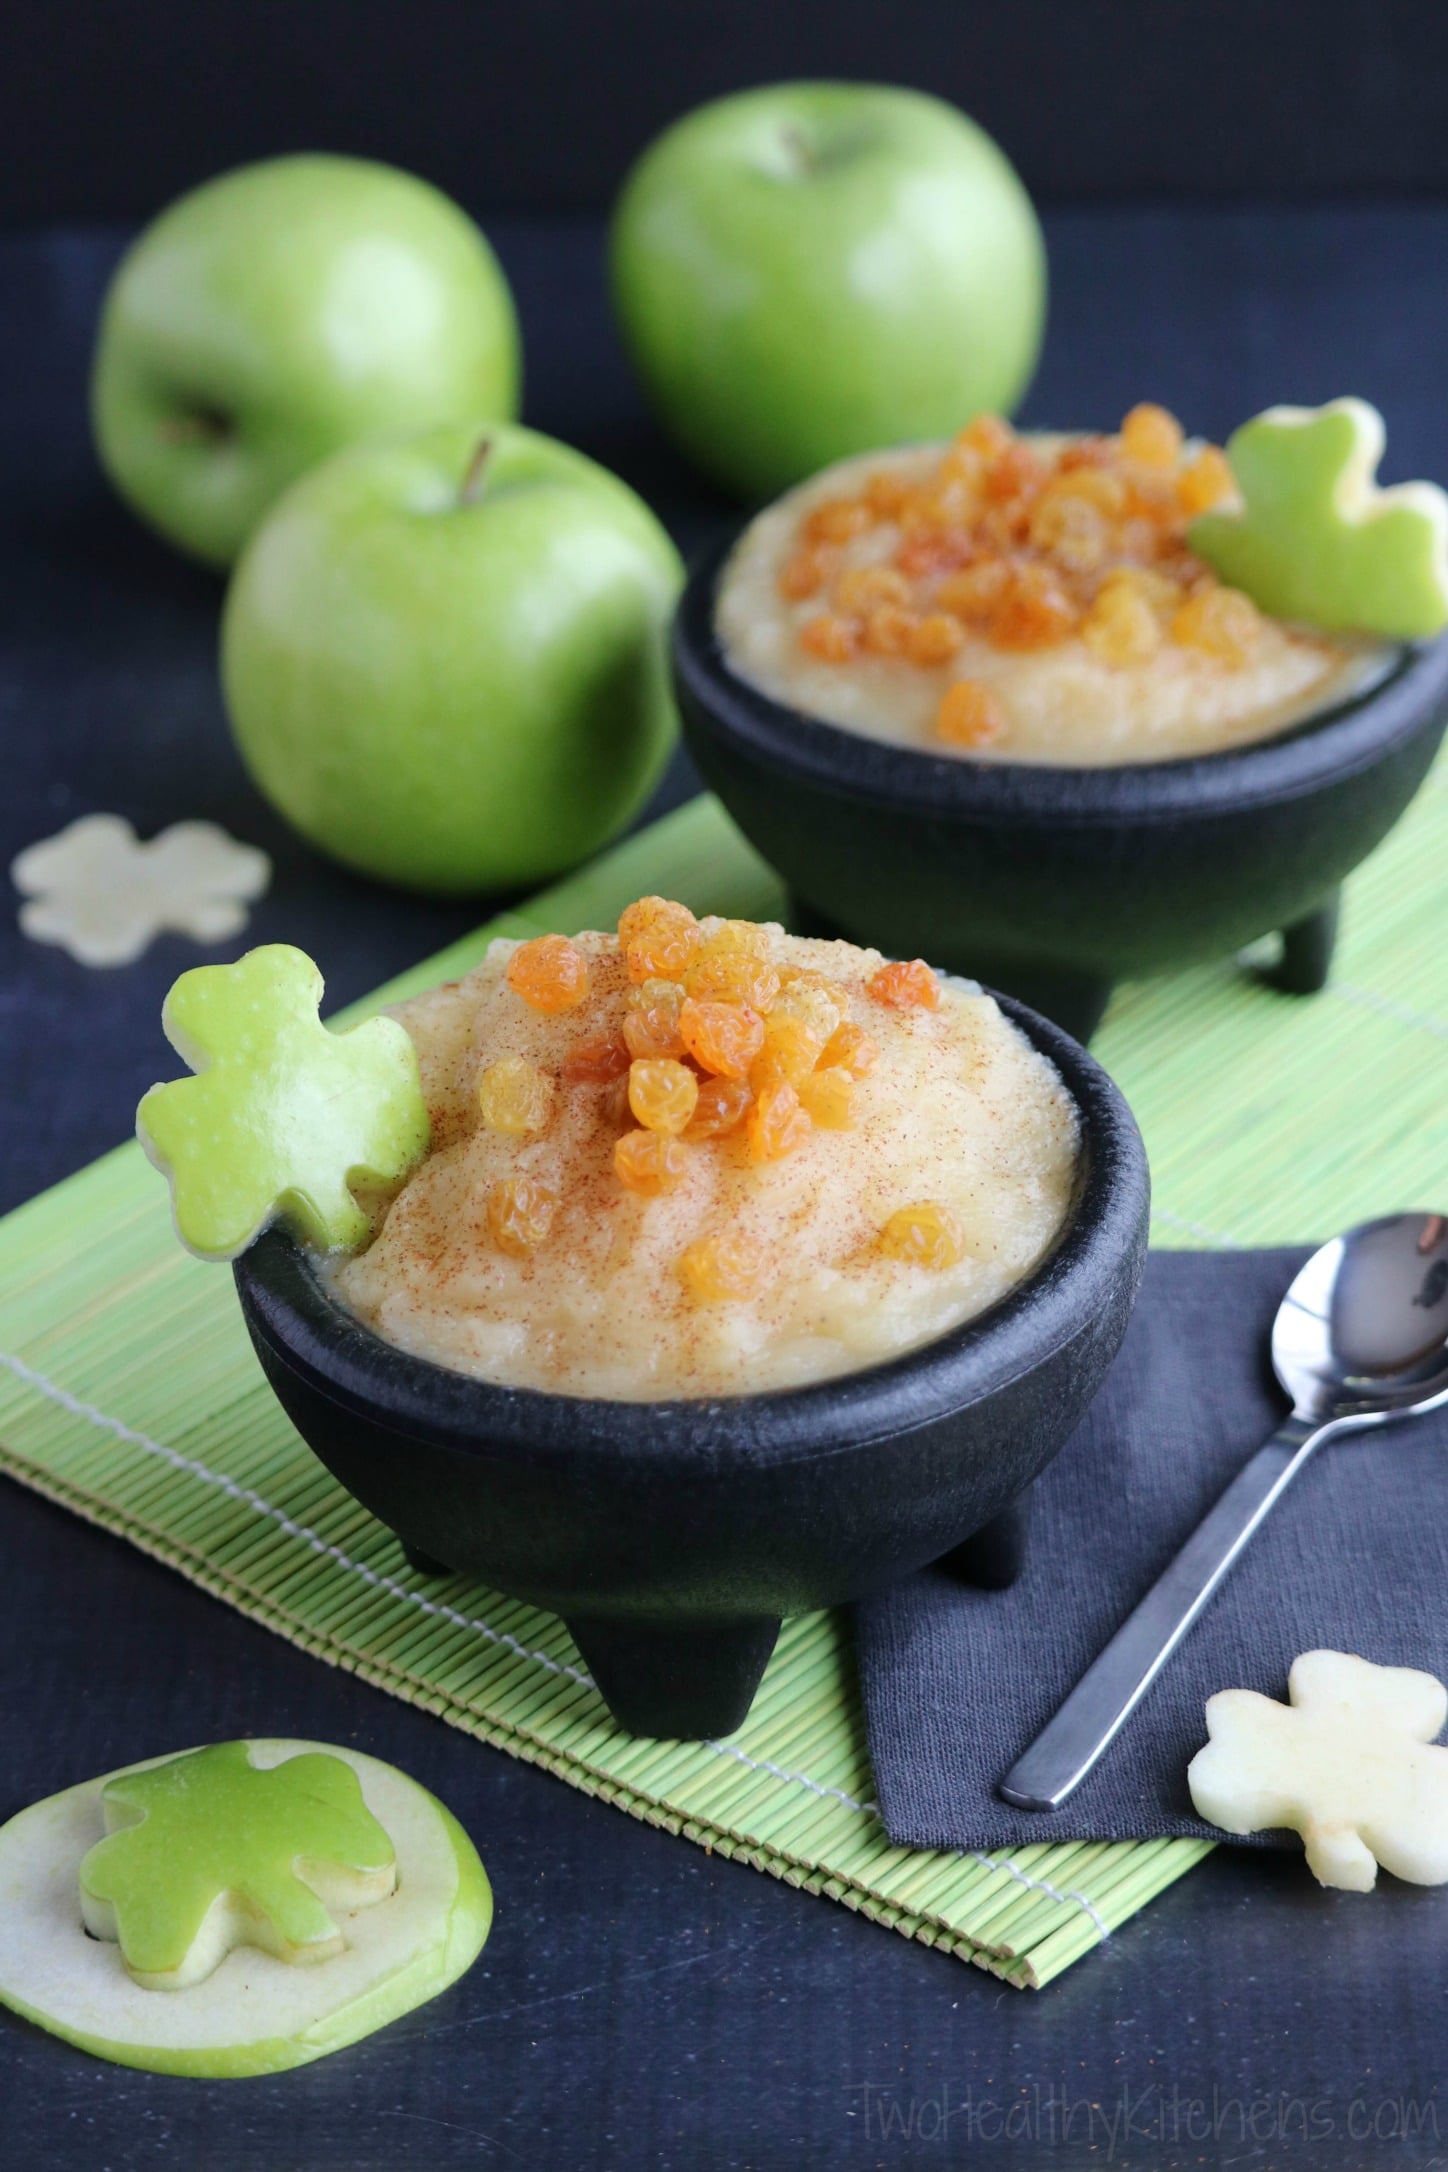 This Naturally Sweetened Pot o' Gold Applesauce is such a fun St. Patrick's Day snack! Quick, easy – and so healthy, too! With natural sweetness from a surprising (golden!) mix-in, your kids will love the luck-o-the-Irish twist, and you'll love all the great nutrition! | www.TwoHealthyKitchens.com